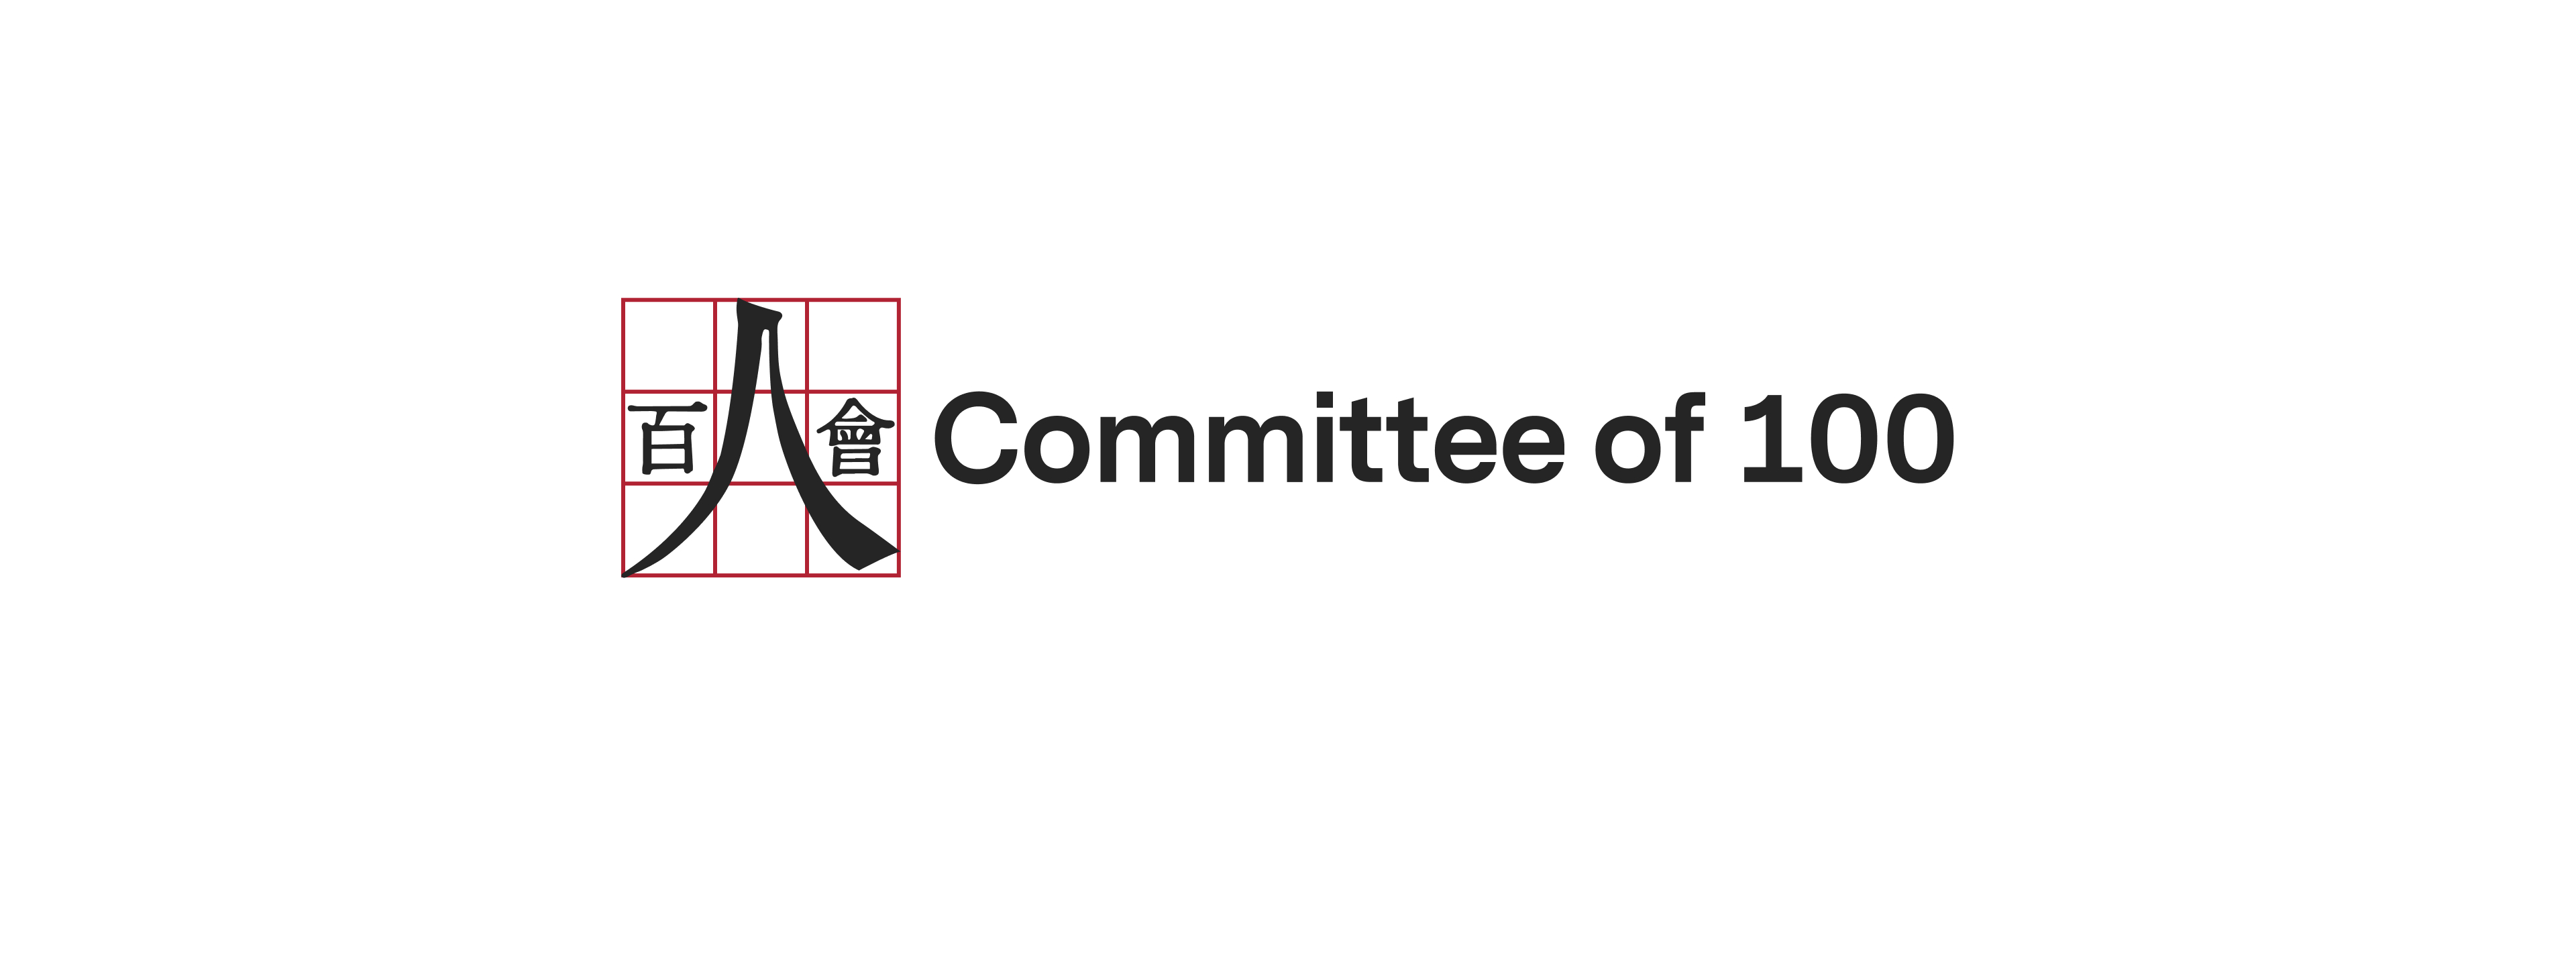 Committee of 100 Annual Conference to Explore Most Pressing Topics on  US-China Relations and Chinese-American Issues